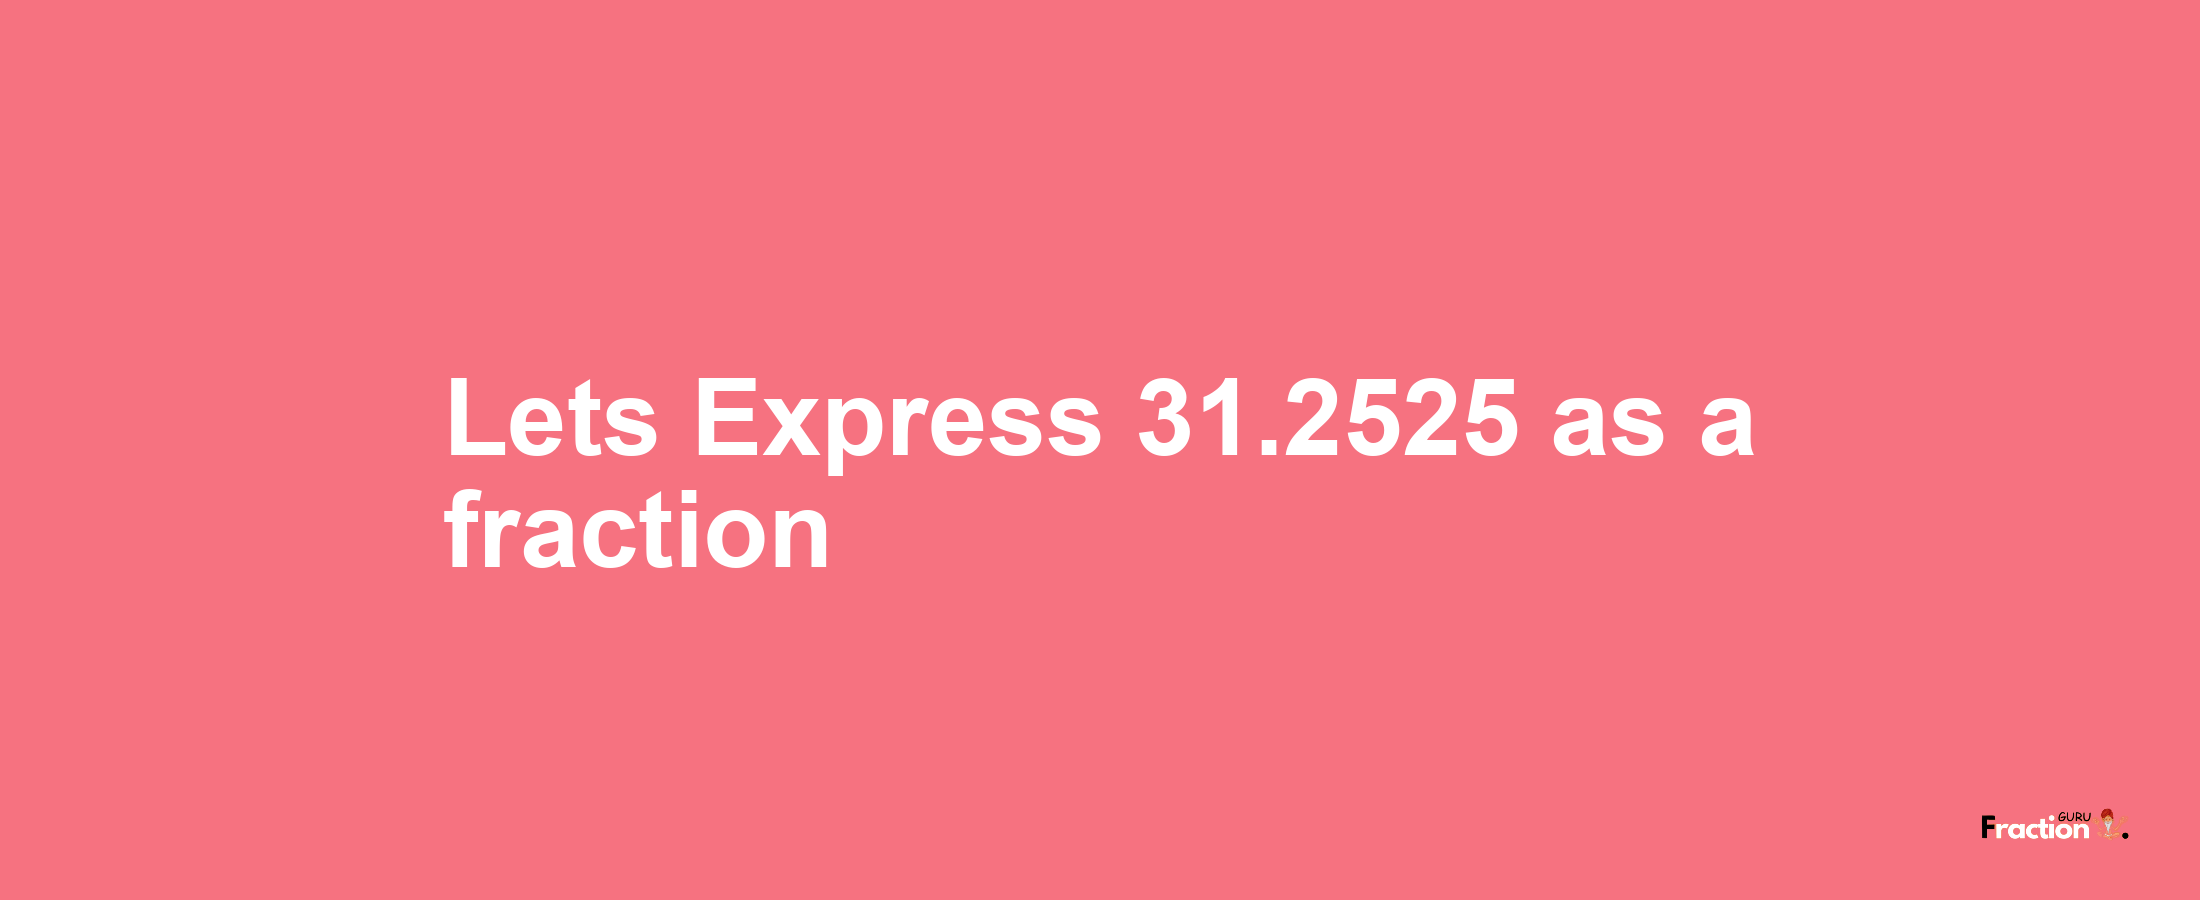 Lets Express 31.2525 as afraction